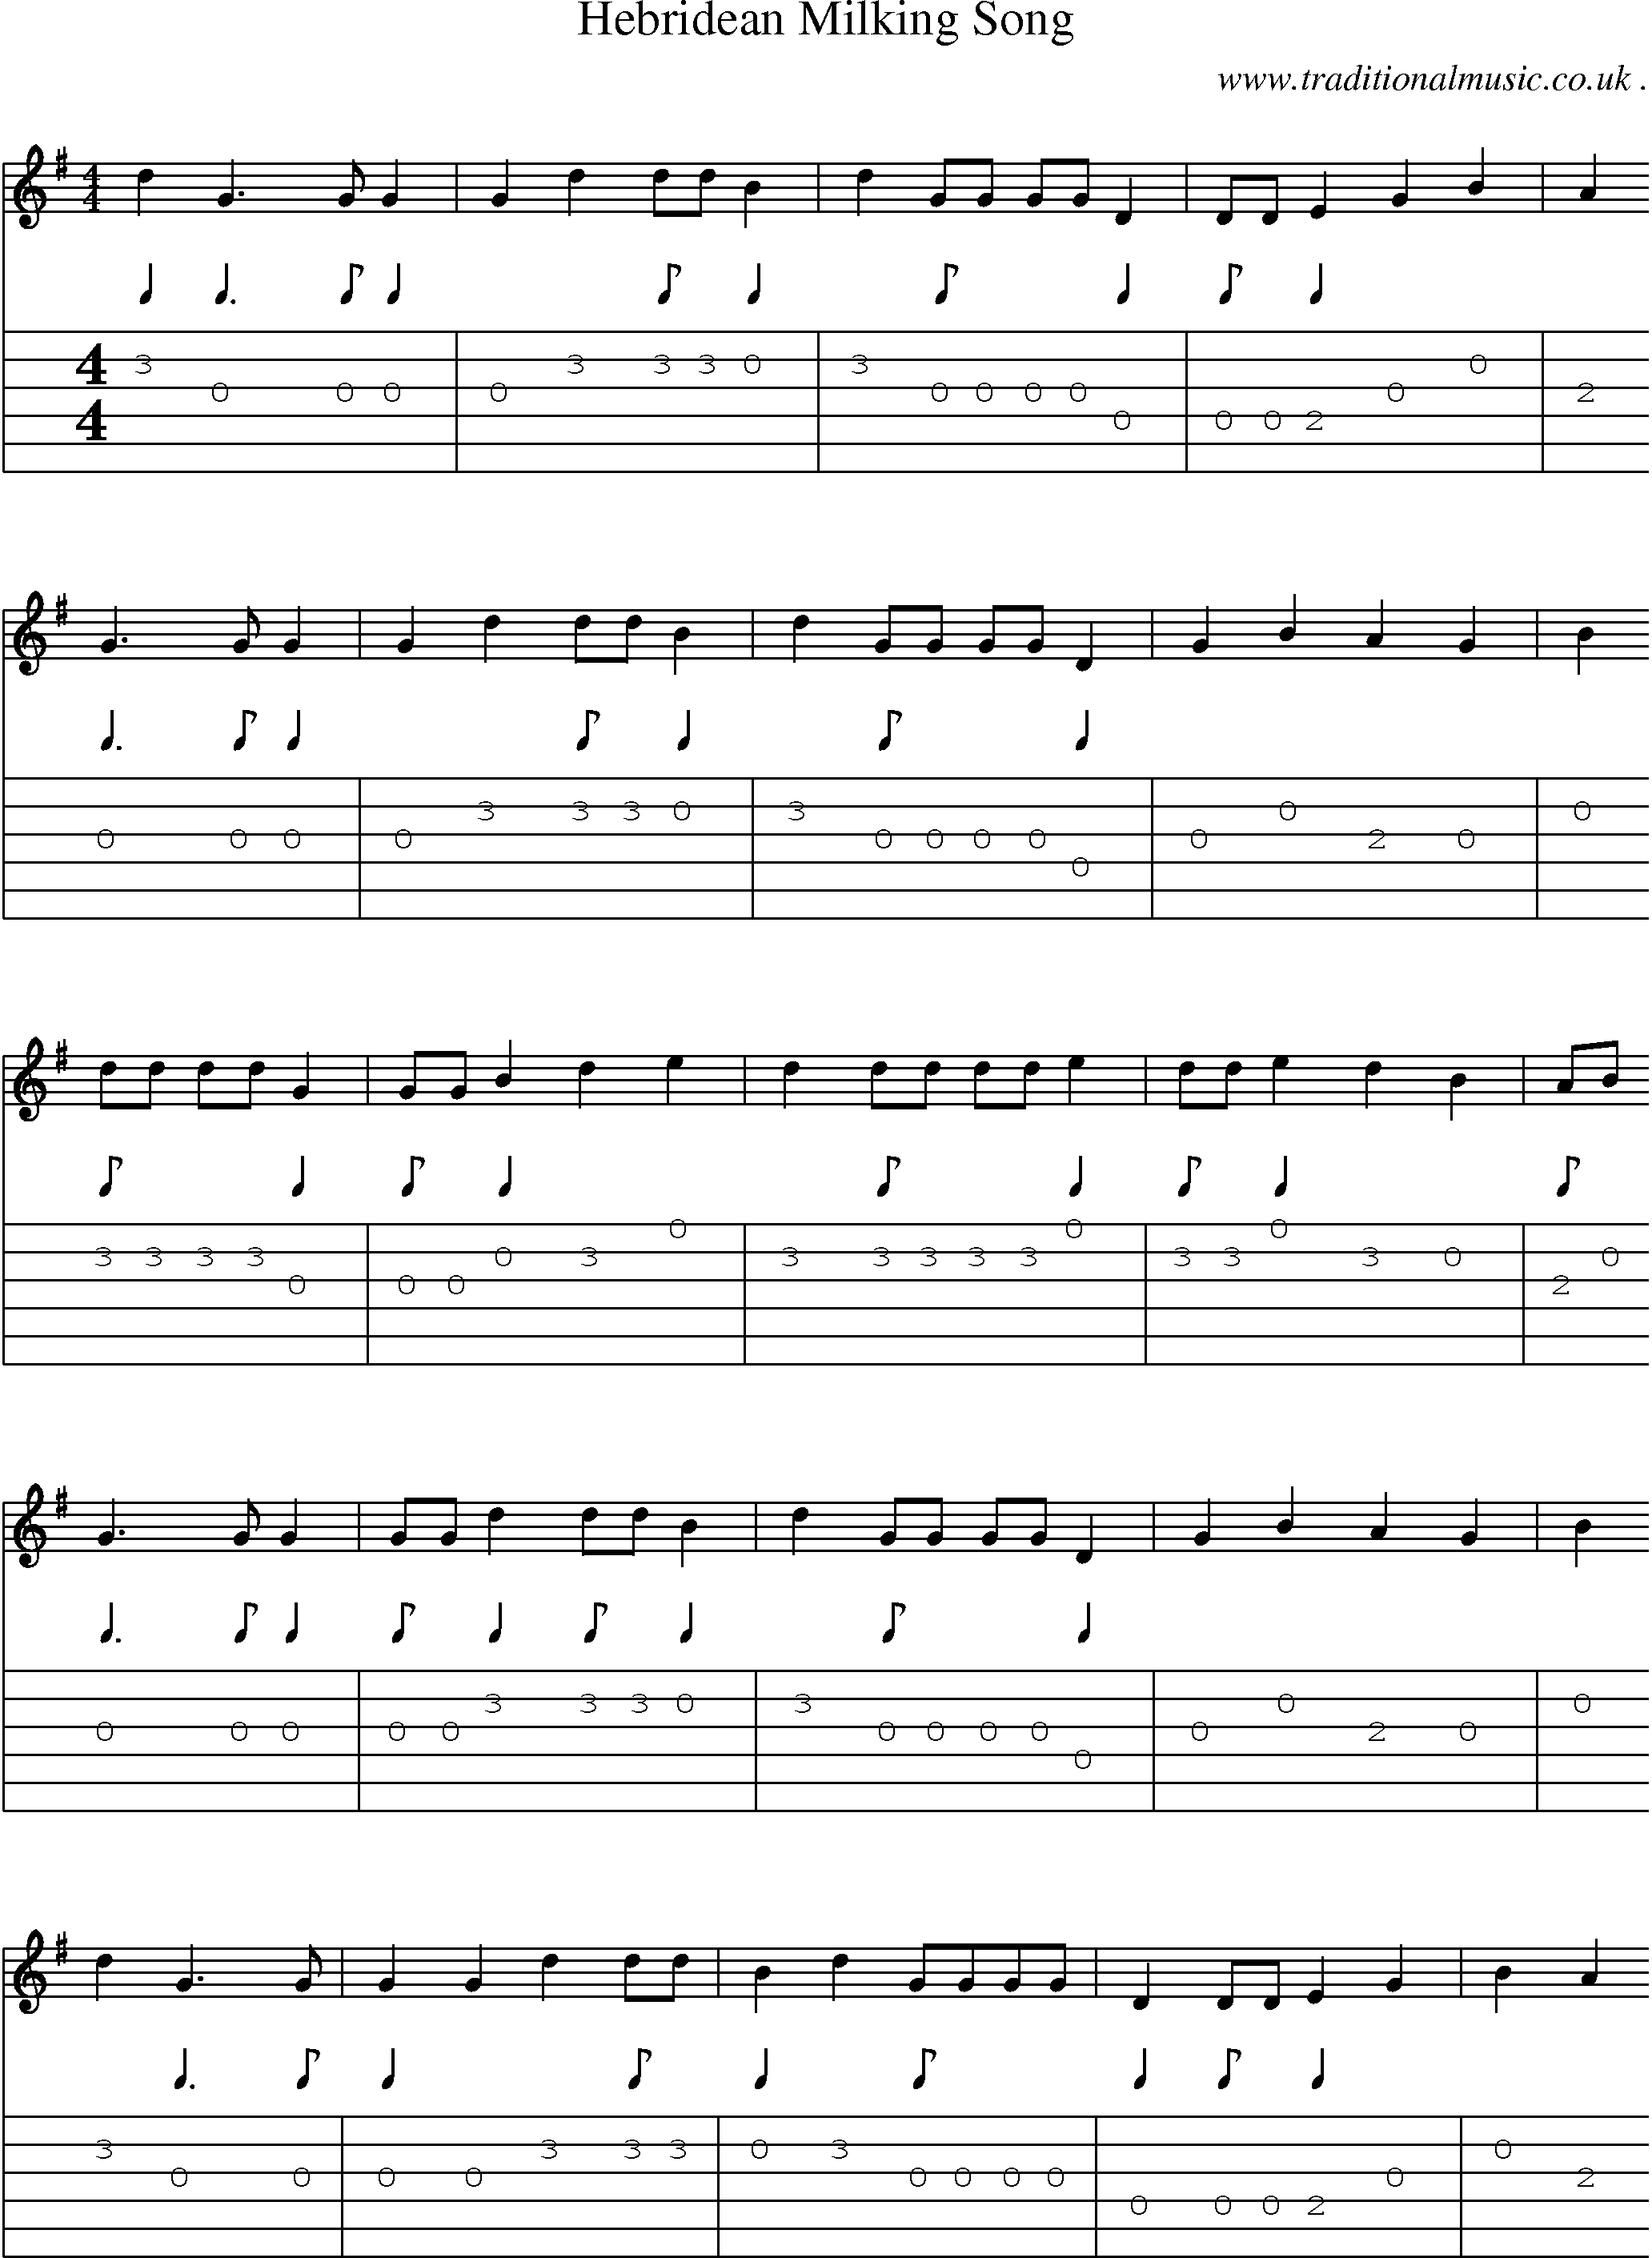 Sheet-Music and Guitar Tabs for Hebridean Milking Song